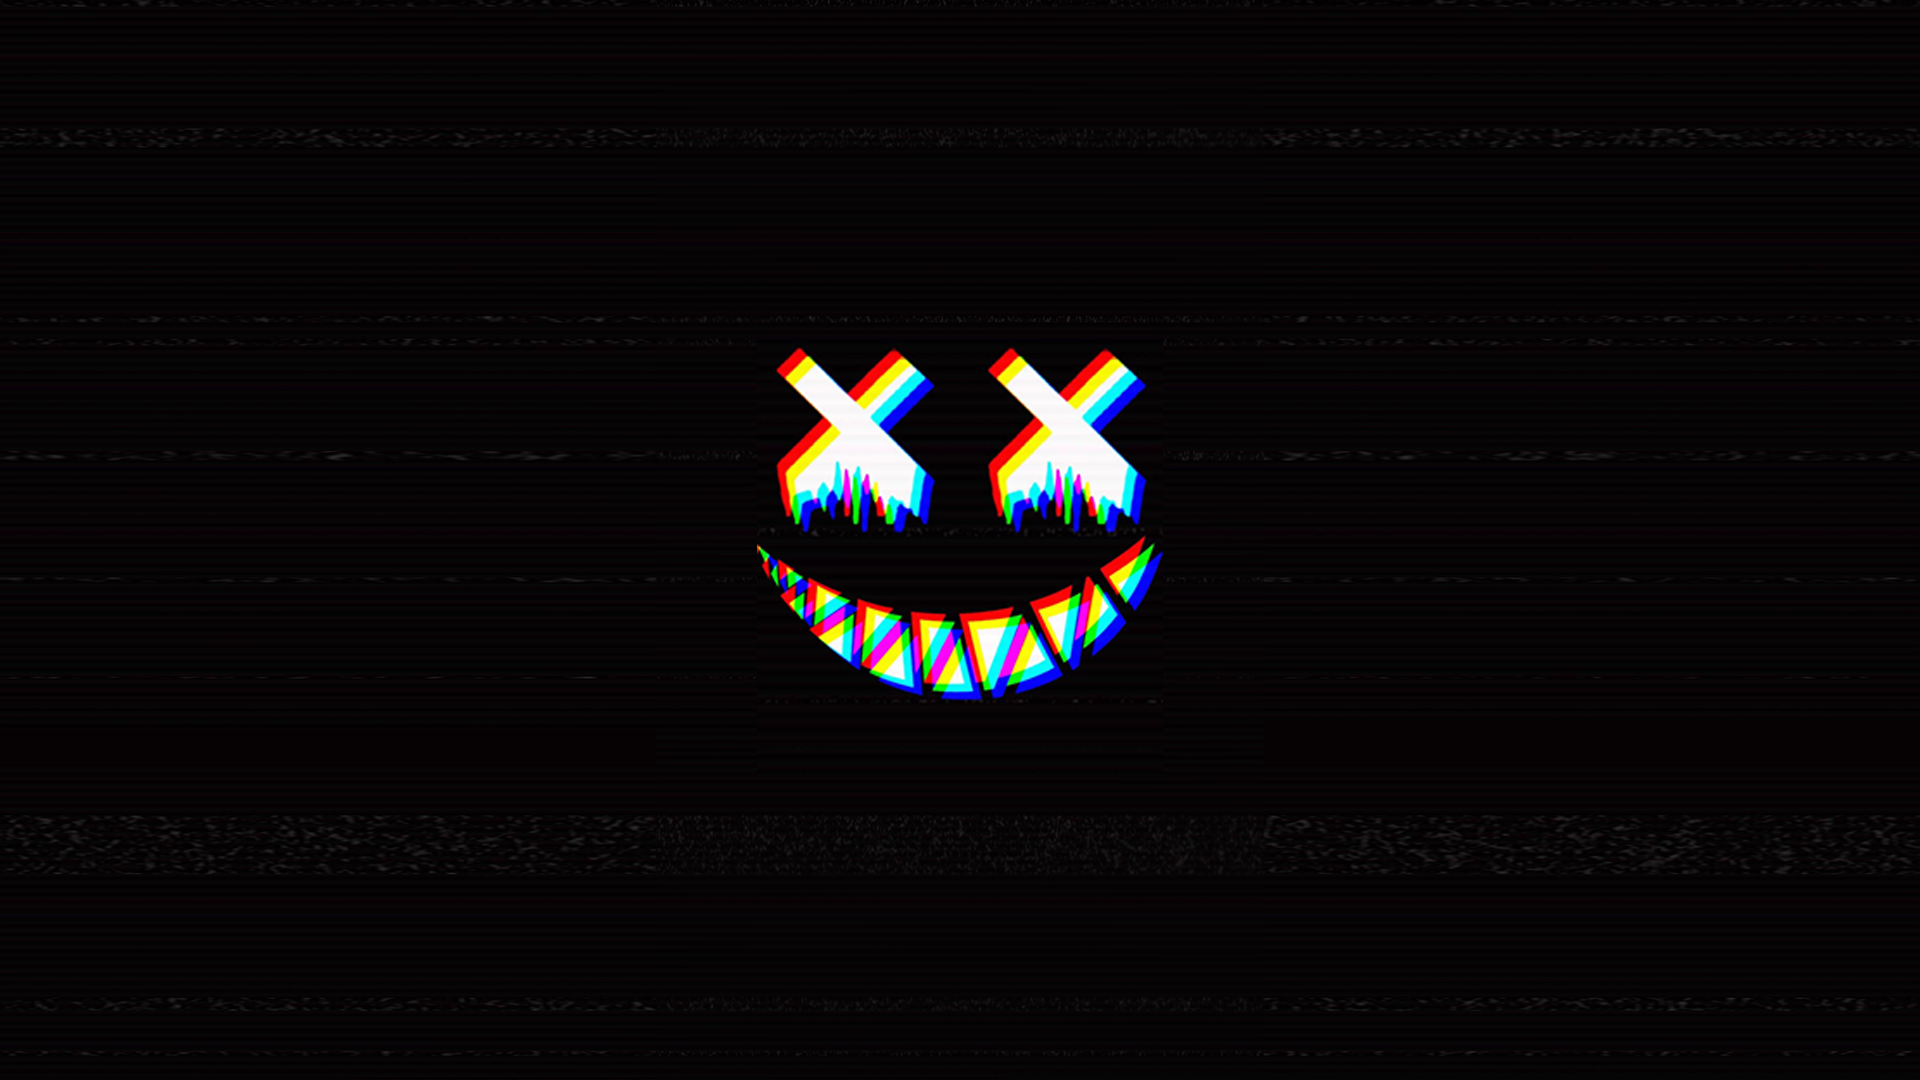 Wallpaper, dark, smile, smiling, large eyes, crying, Crazy Face, glitch art, minimalism, errors, scary face, Terror 1920x1080